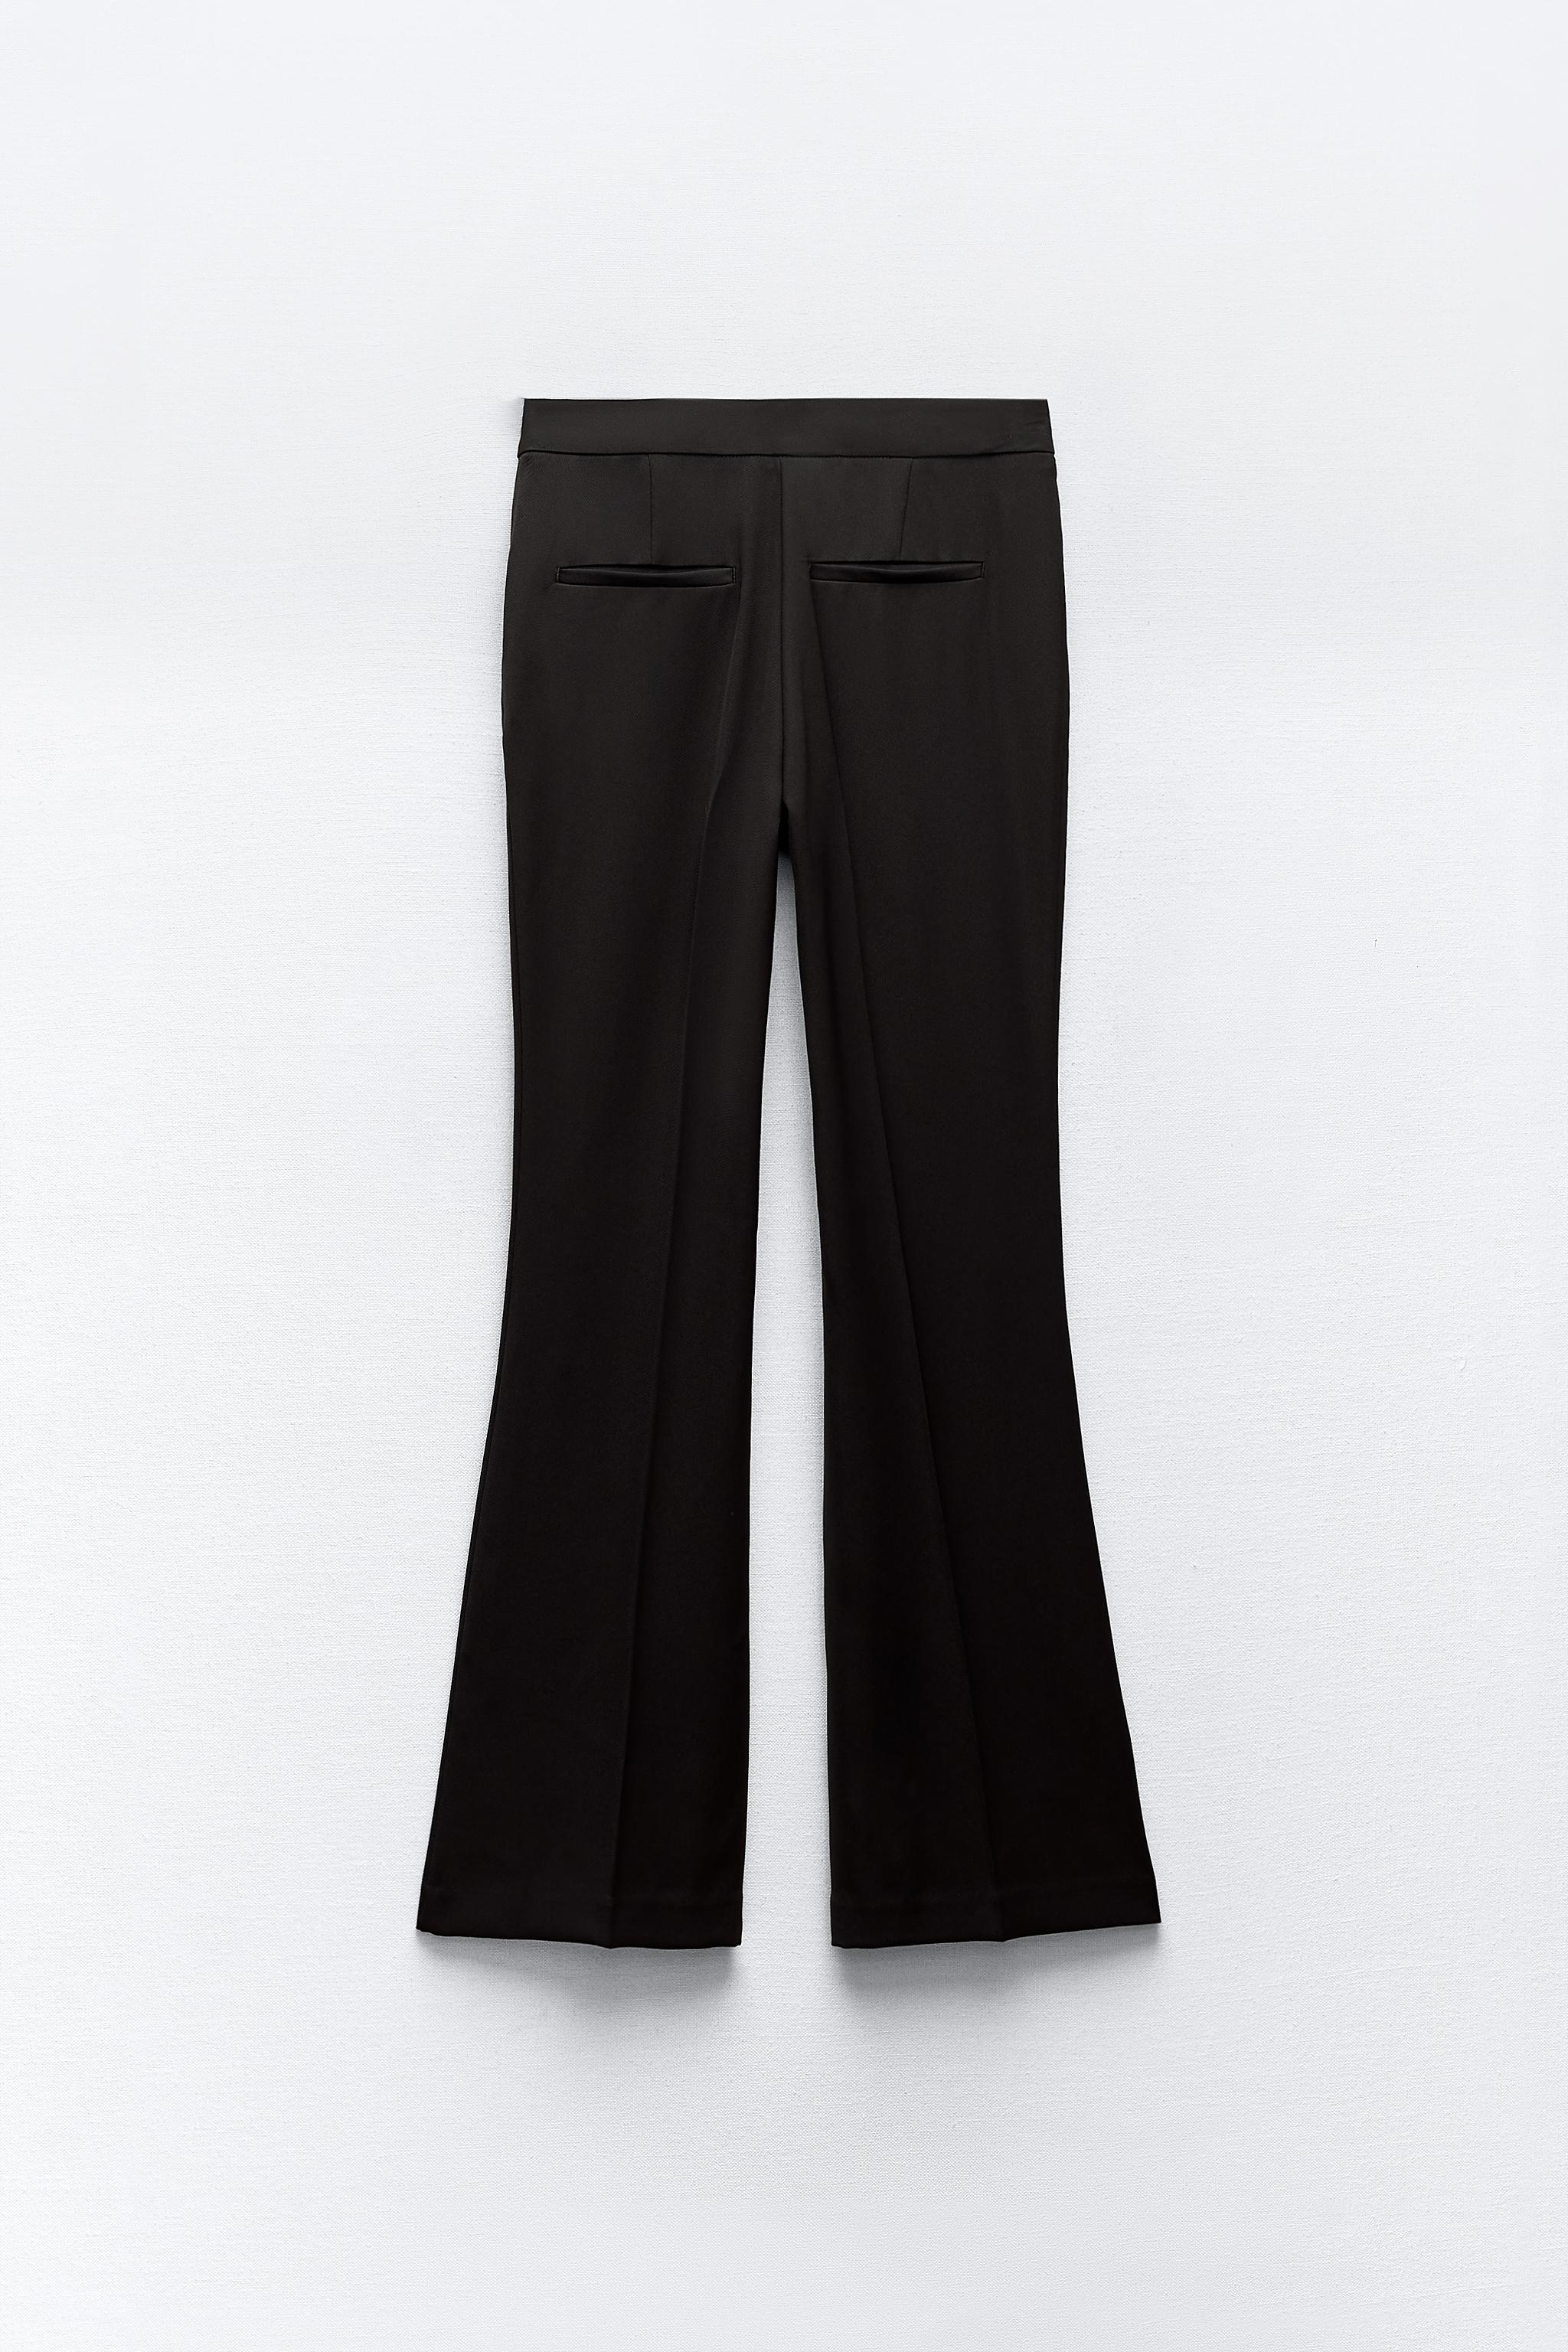 ZARA Studio New Black Bell Extra Flared Trousers Pants Sold Out